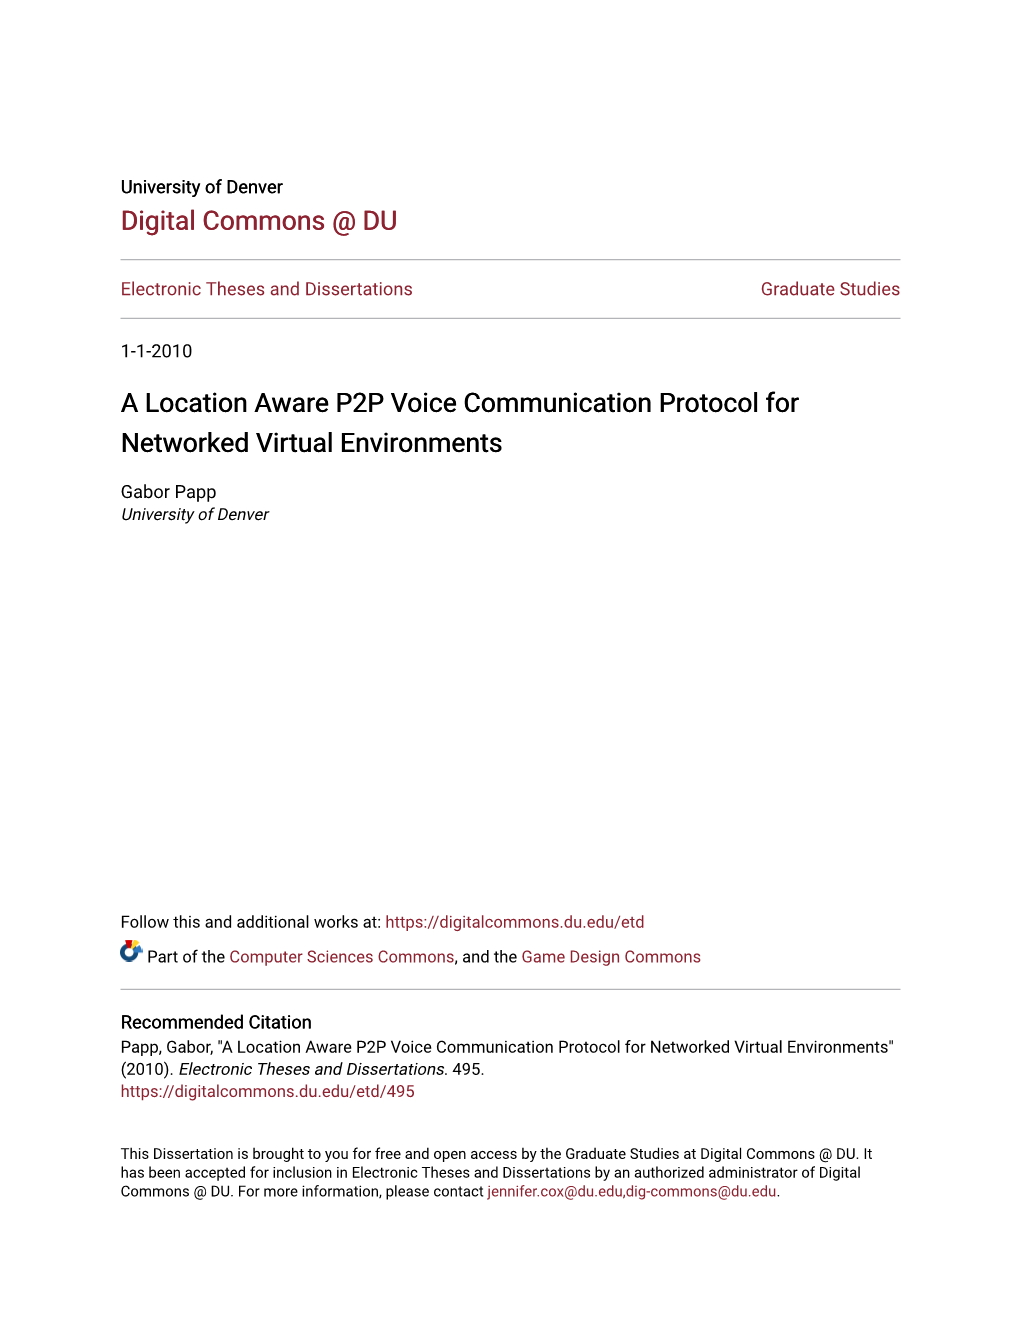 A Location Aware P2P Voice Communication Protocol for Networked Virtual Environments